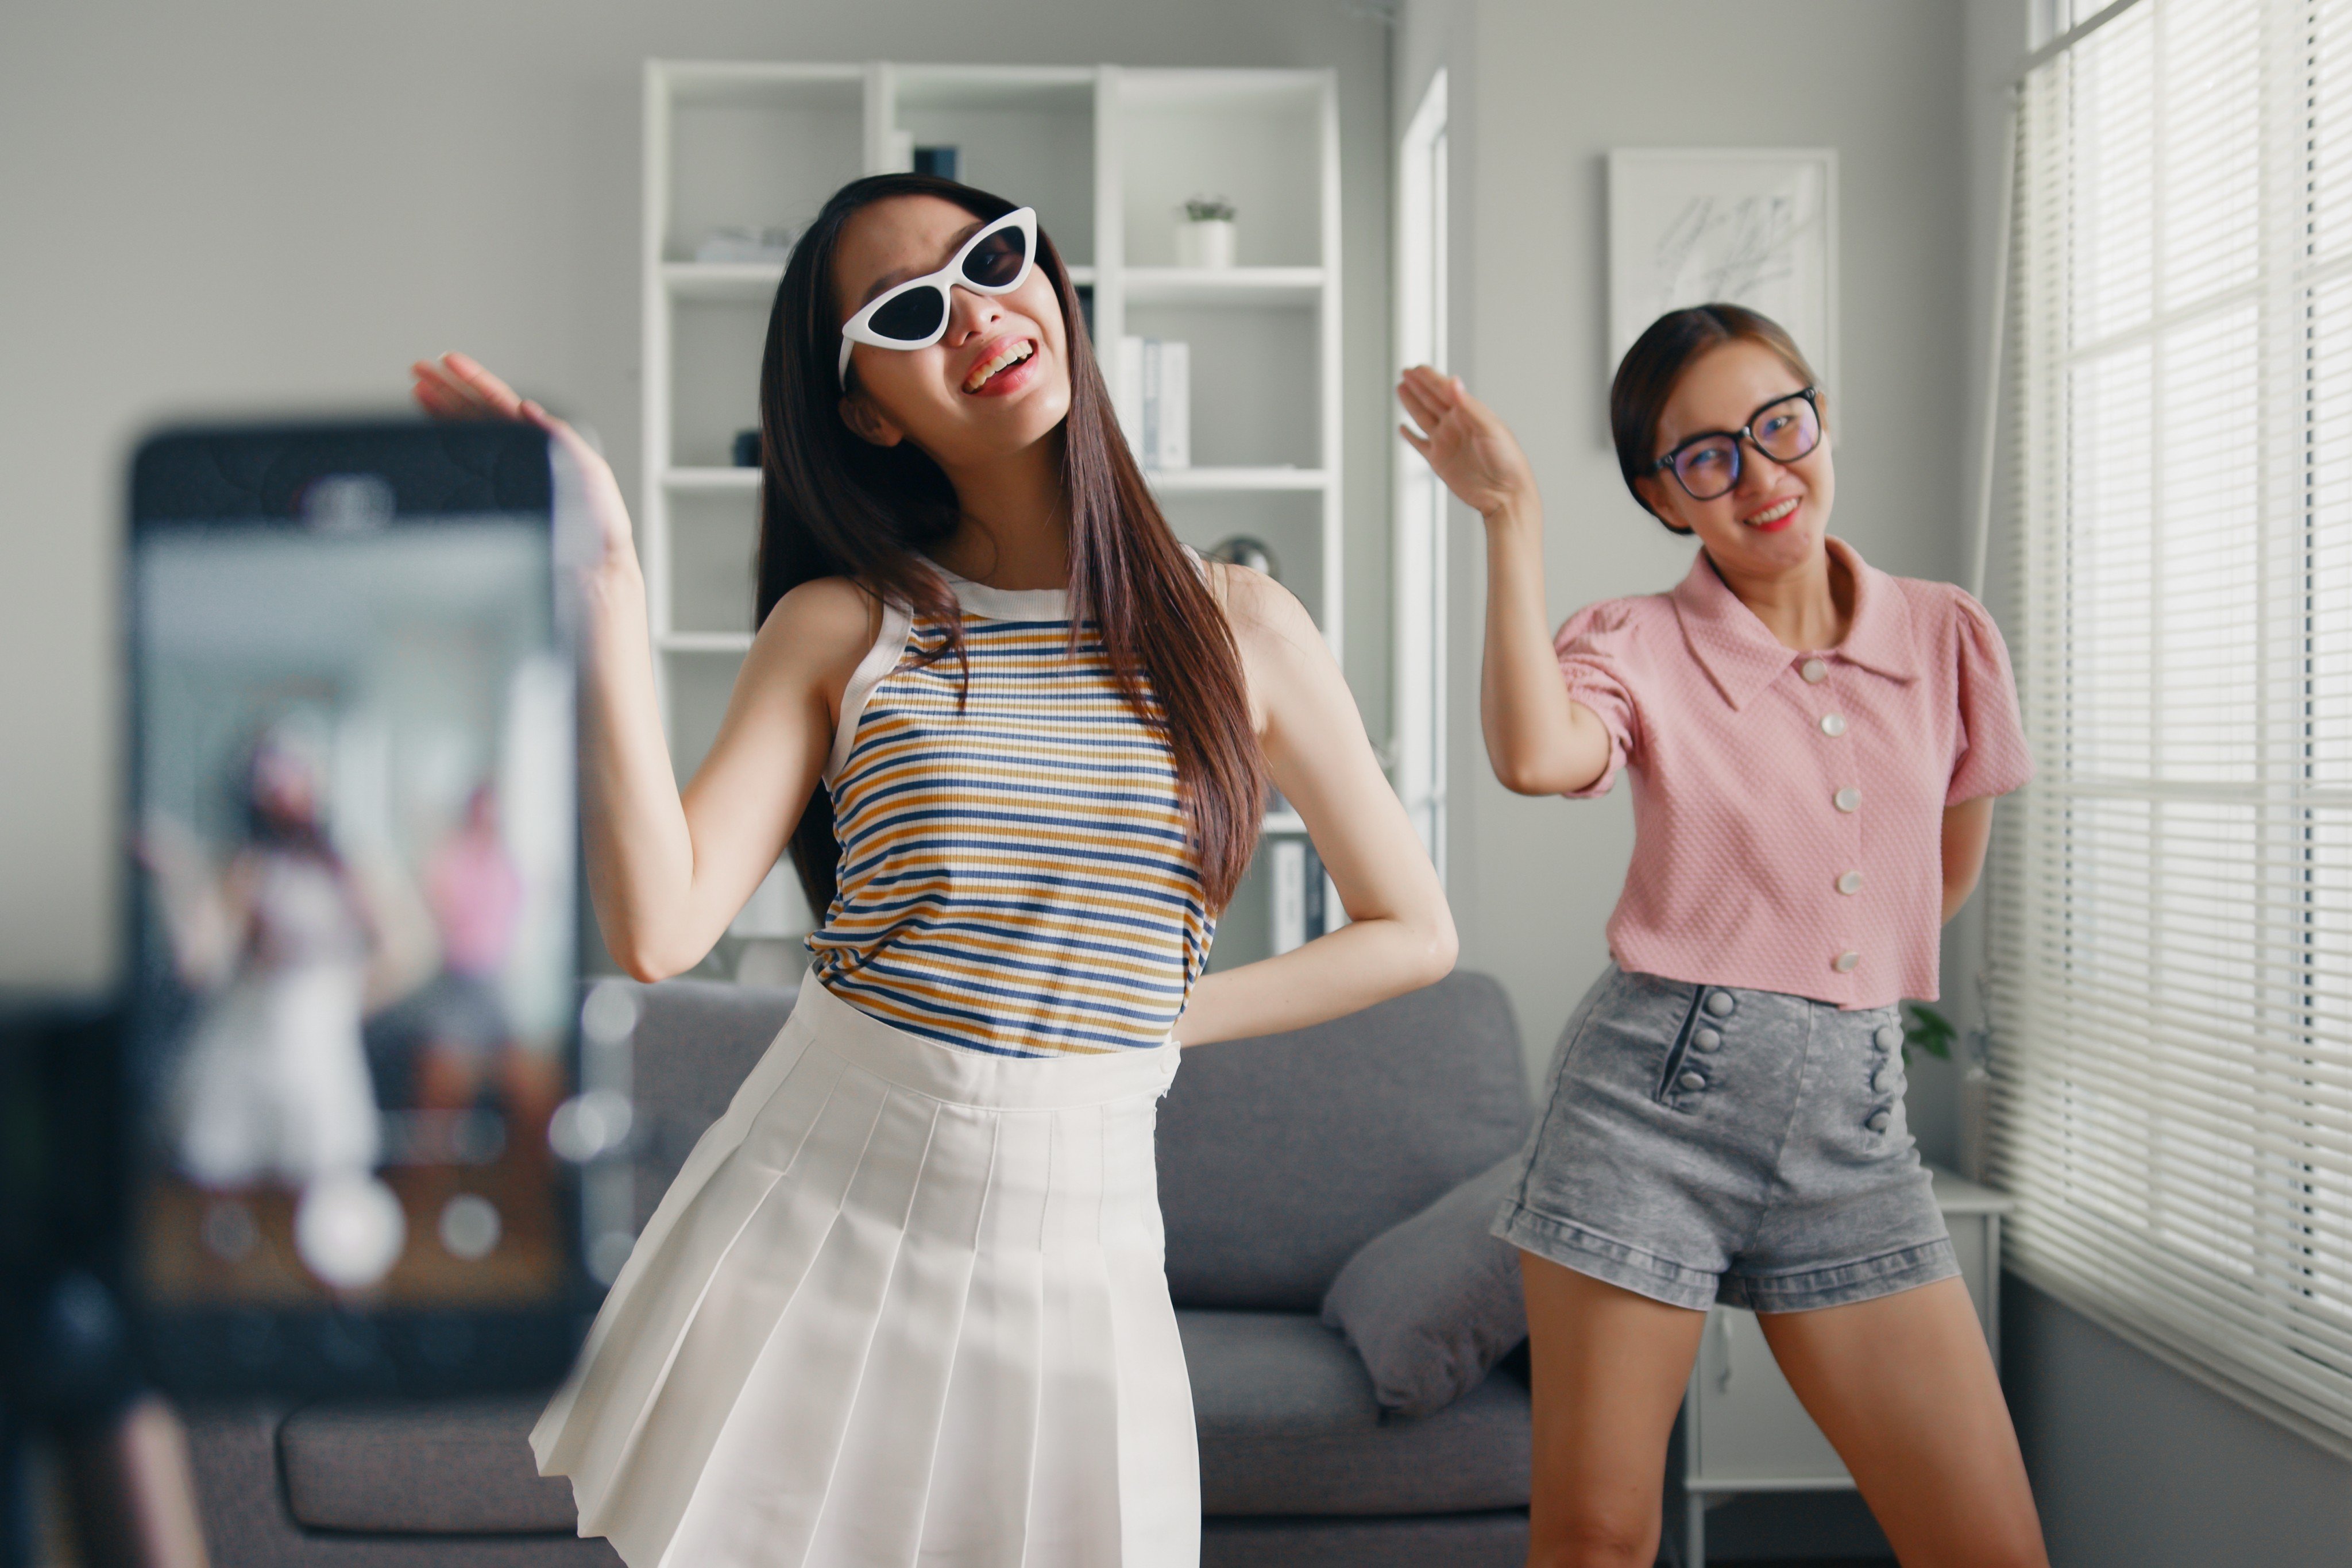 Teens film a TikTok dance video with a smartphone. TikTok challenges and trends are designed to feed an algorithmic popularity contest. Photo: Shutterstock 